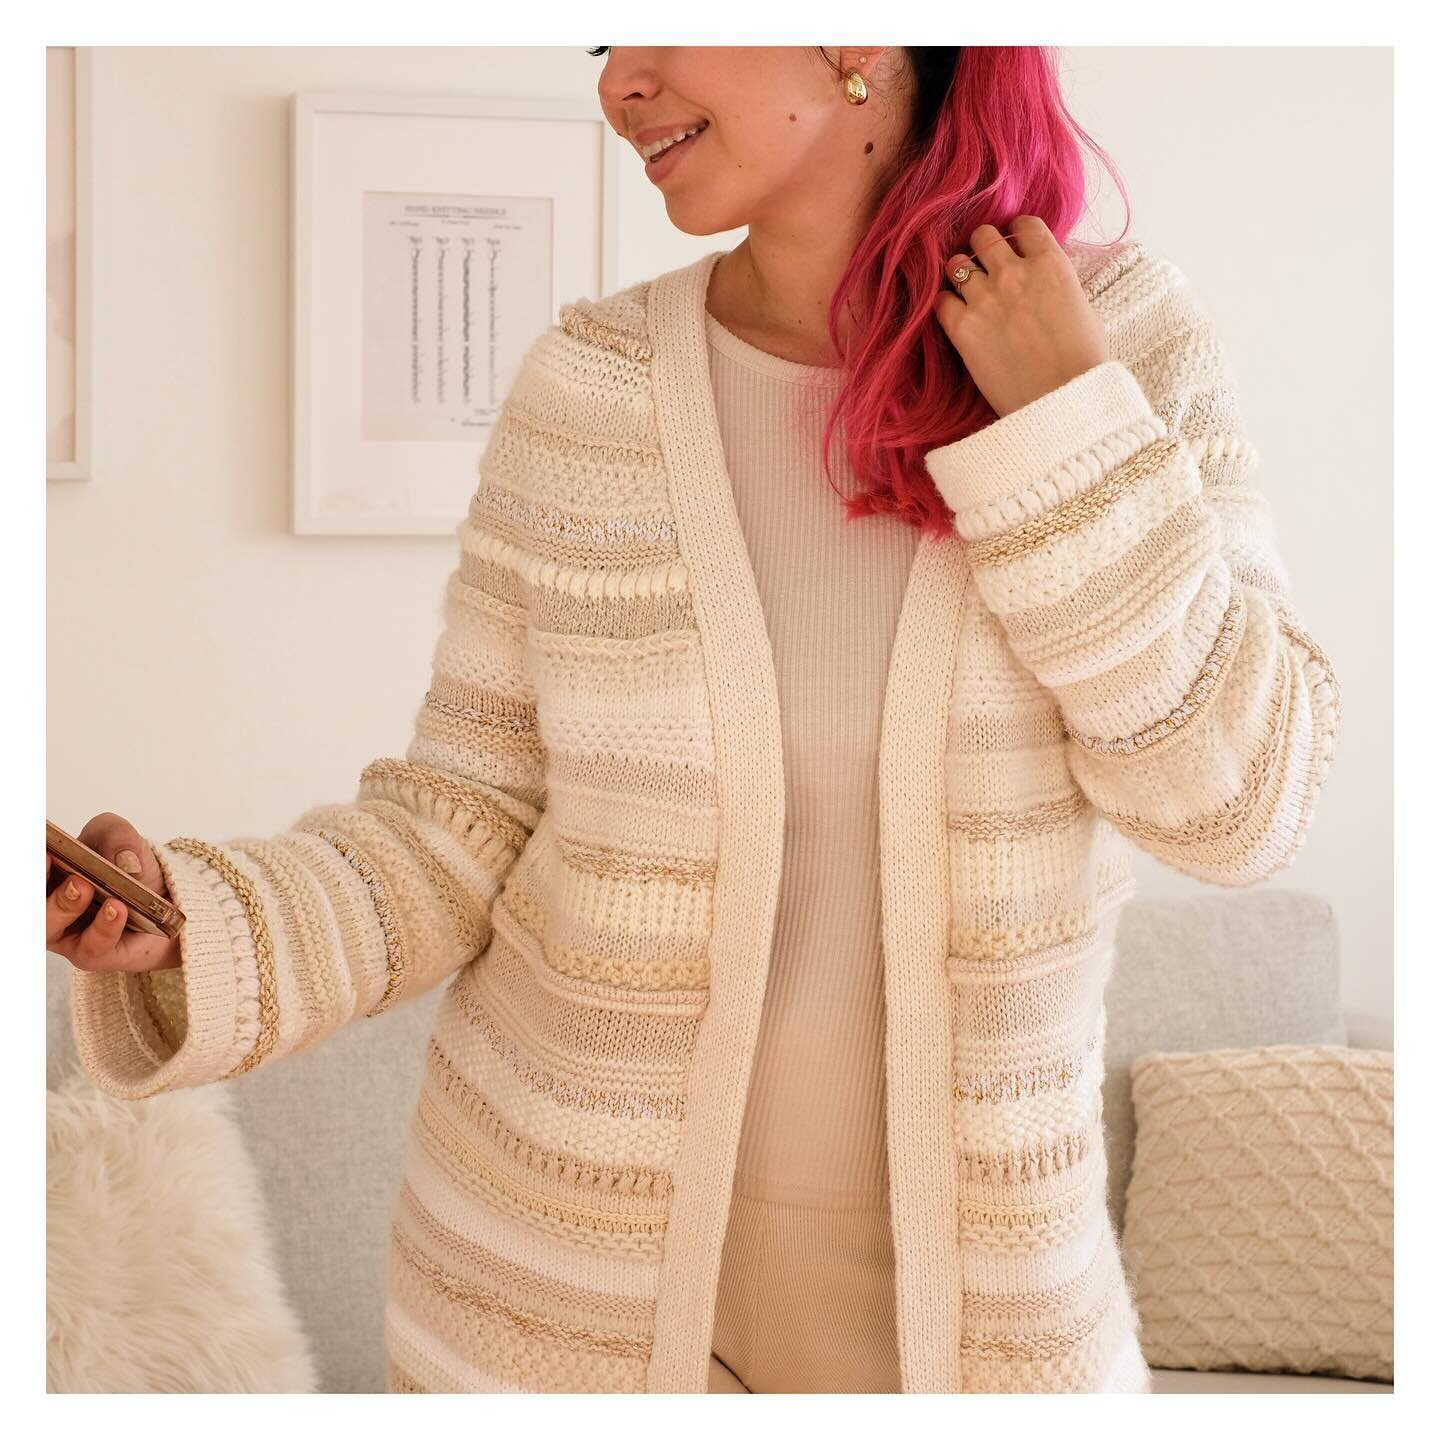 Please welcome the Scrapdigan ➰

This design is a pure labor of love, and I am very happy to finally share it with you. There will be a knit-along, plus we have a 20% intro discount with the code 20off till the end of the day Sunday both on Ravelry a